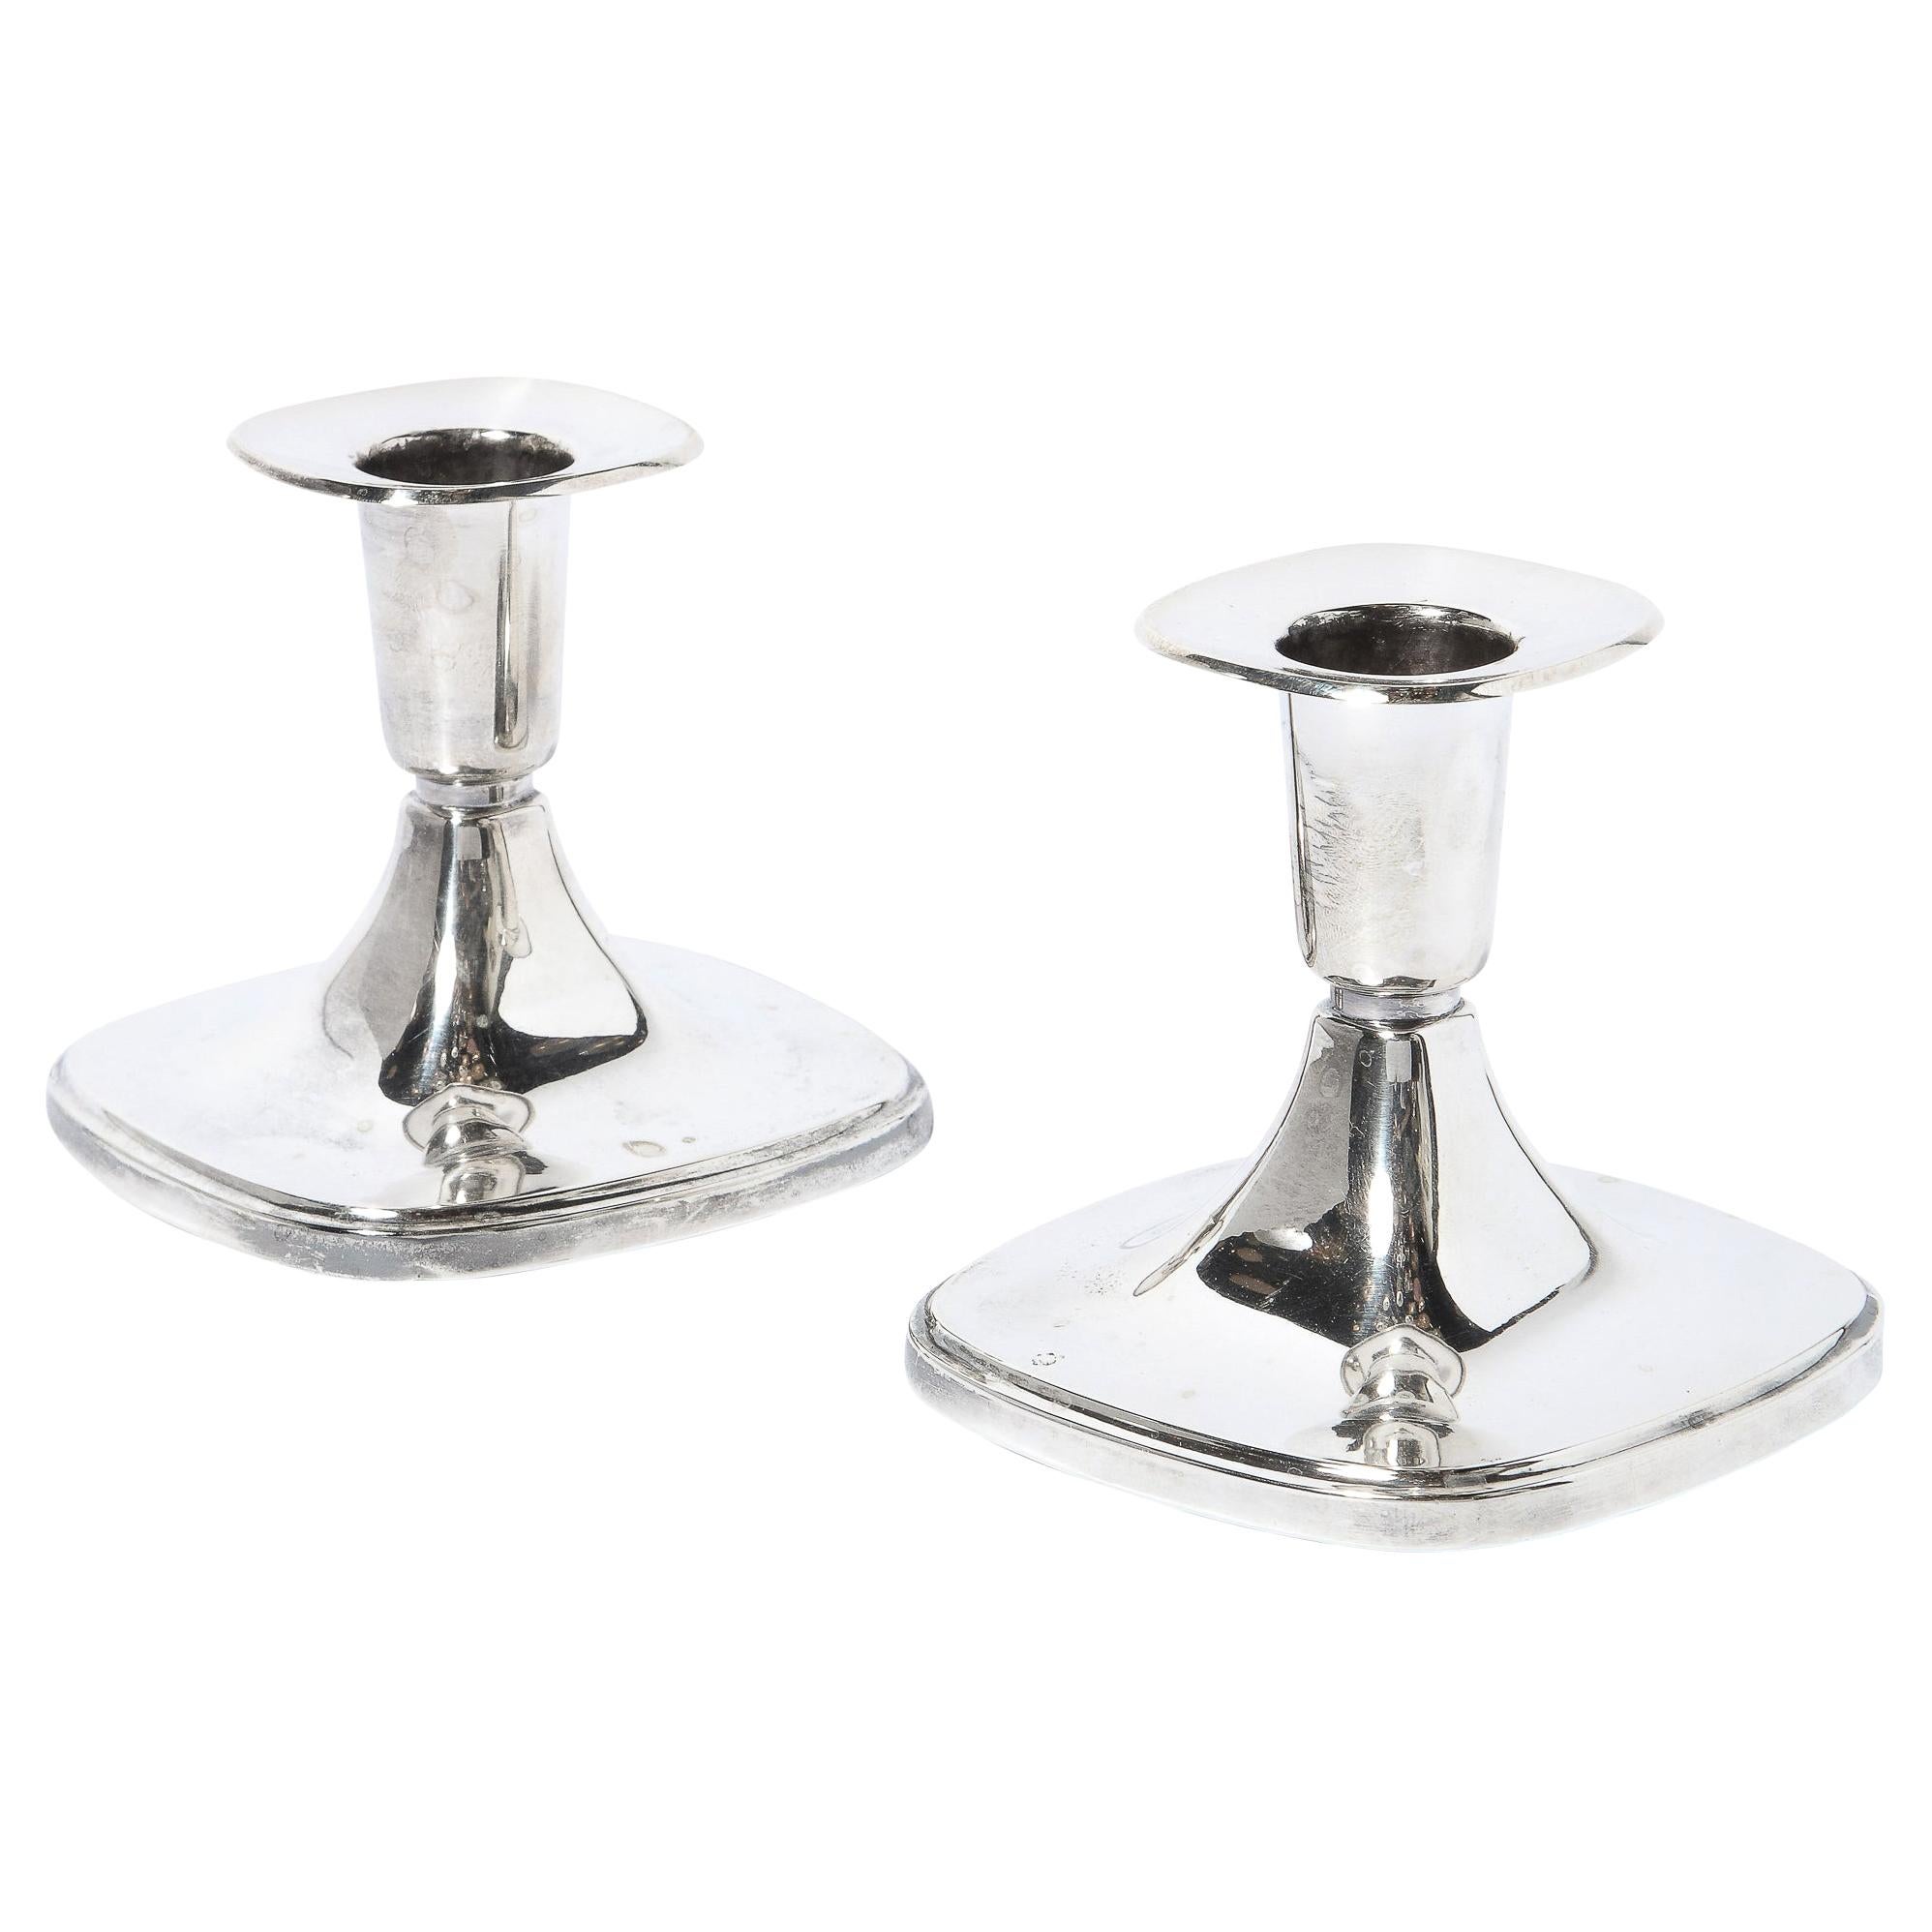 Pair of Mid-Century Modern Handblown Banded Candlesticks by Val St. Lambert  For Sale at 1stDibs